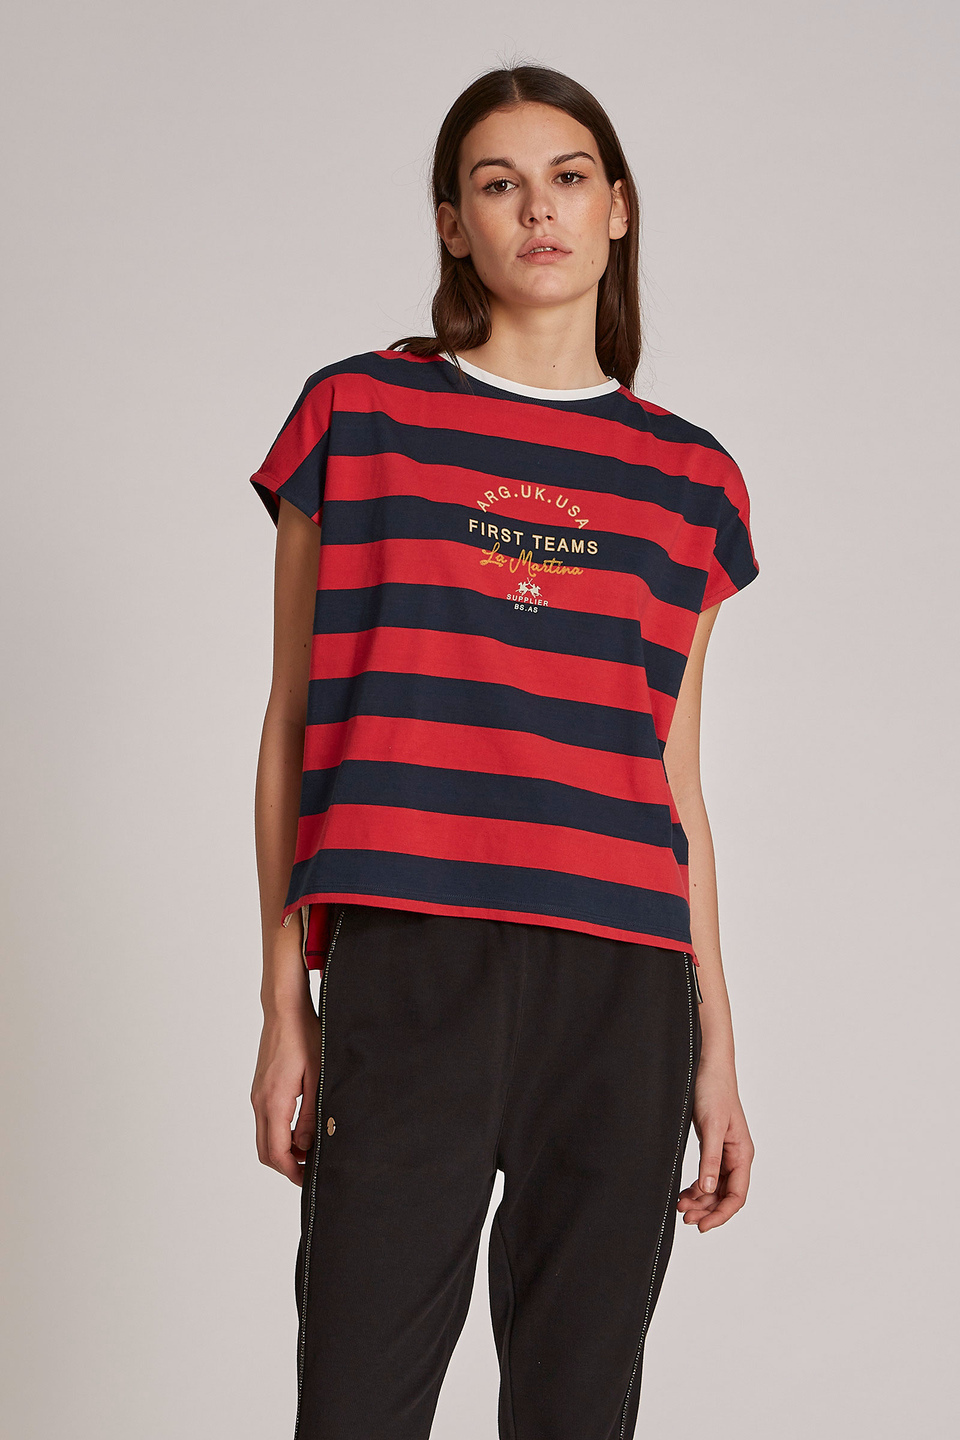 Women's regular-fit two-tone striped T-shirt in 100% cotton fabric - La Martina - Official Online Shop